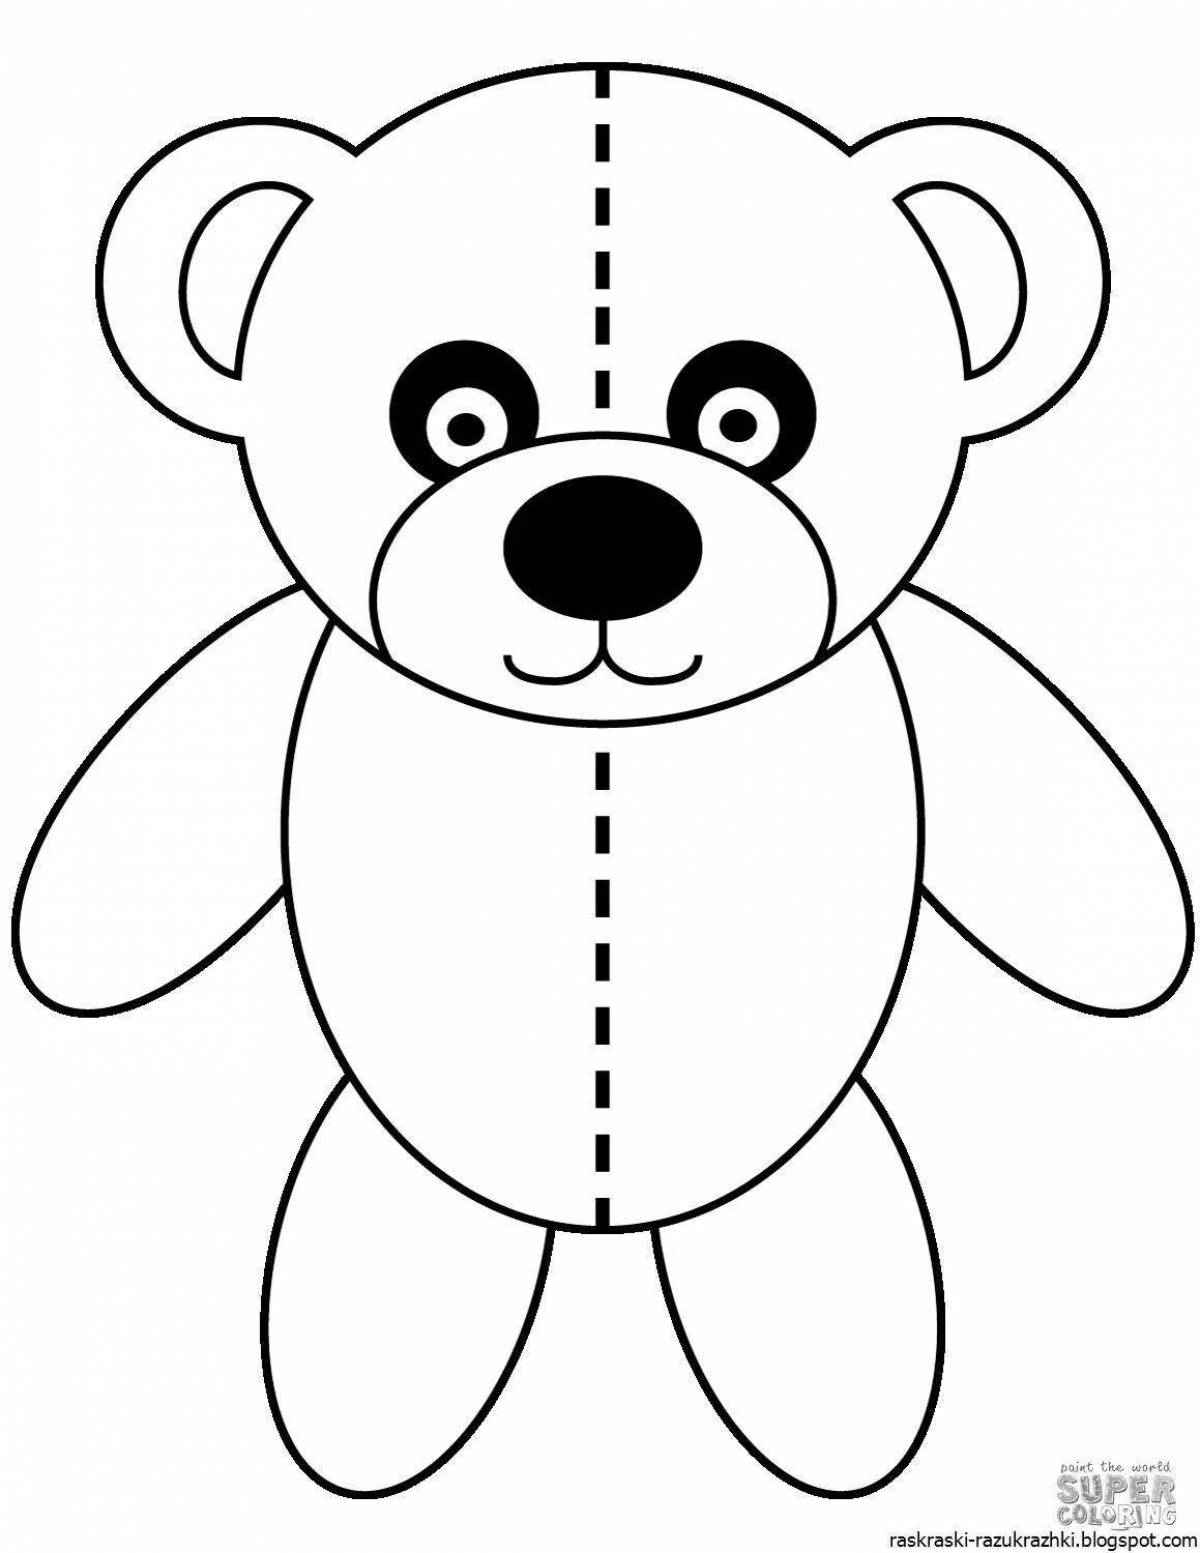 Animated drawing of a teddy bear for children